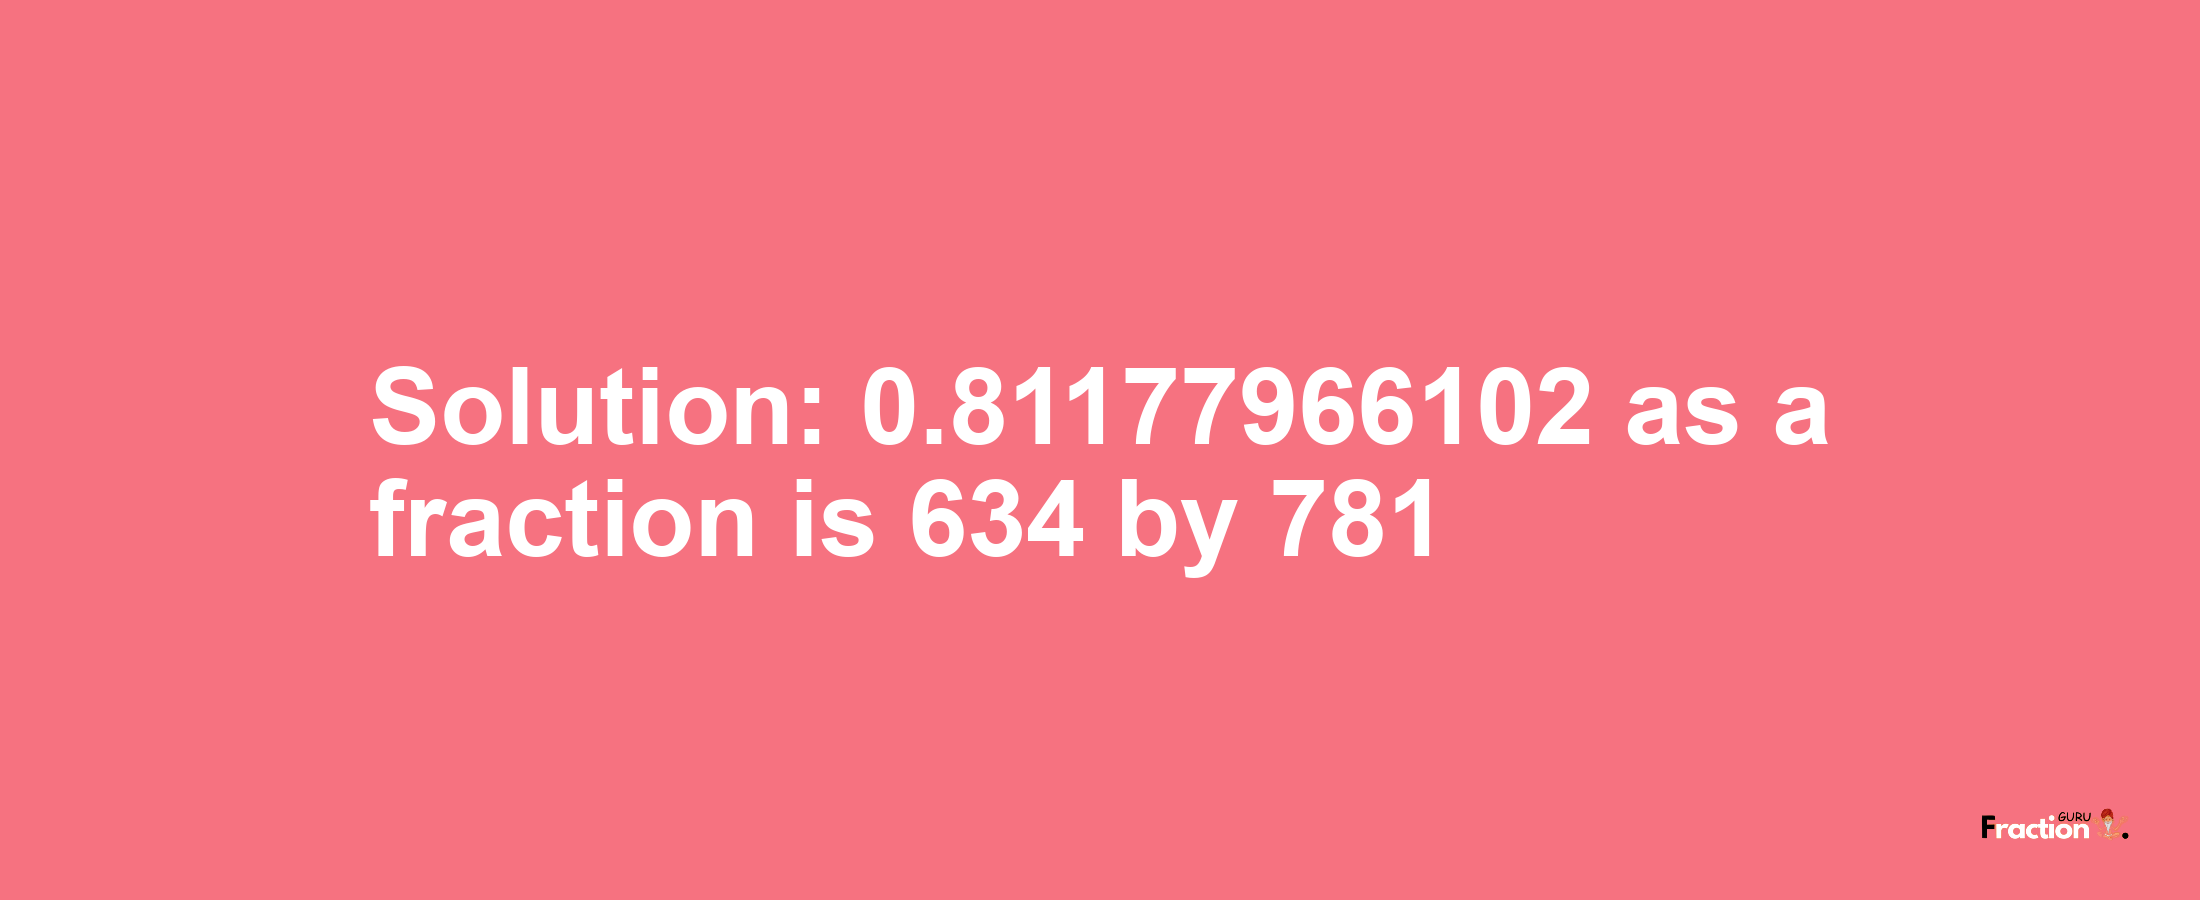 Solution:0.81177966102 as a fraction is 634/781